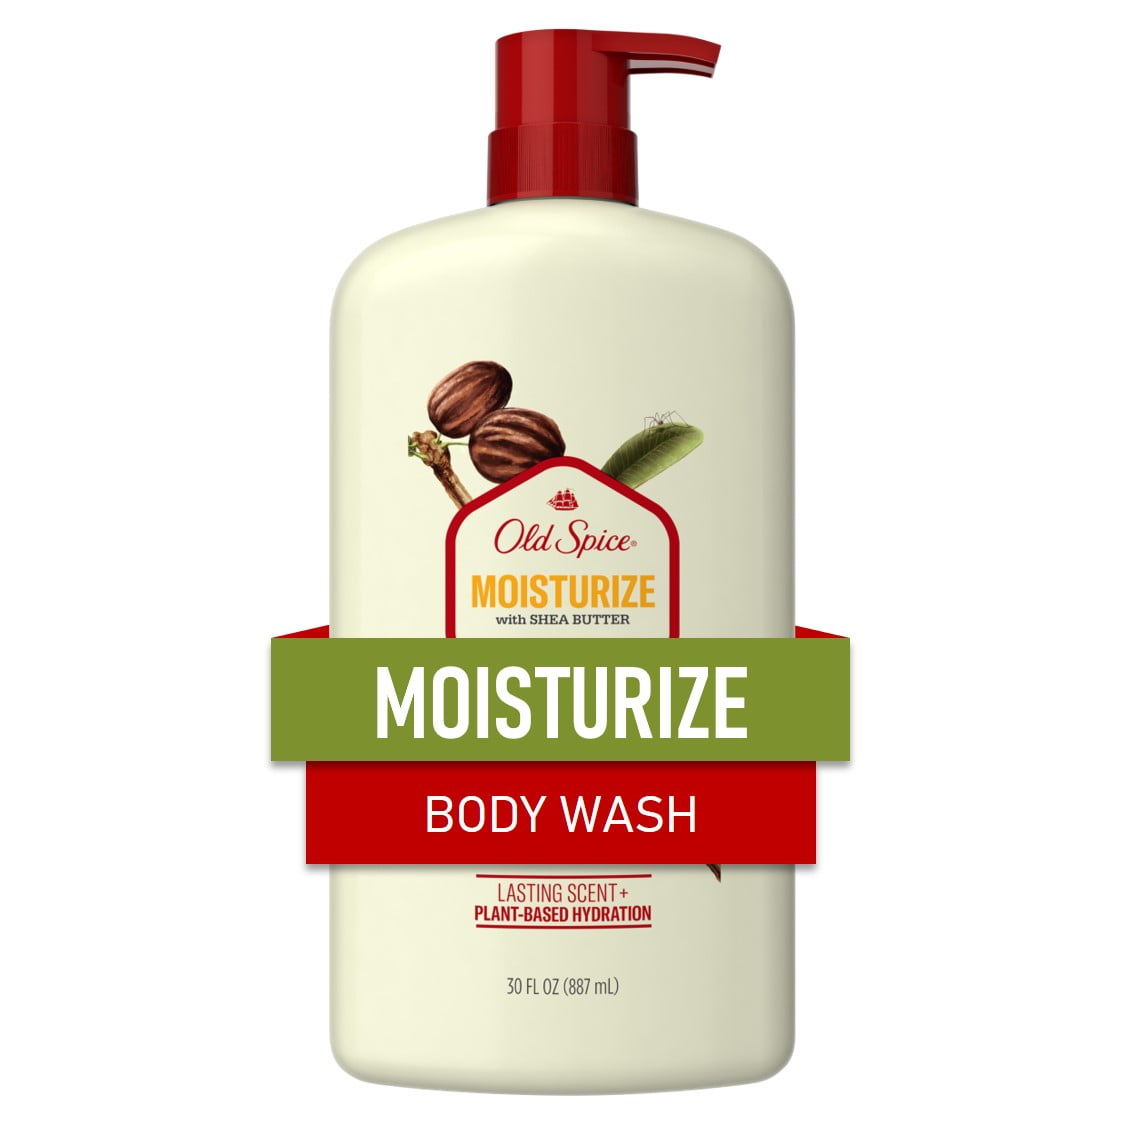 Old Spice Men's Body Wash Moisturize with Shea Butter, 30 oz